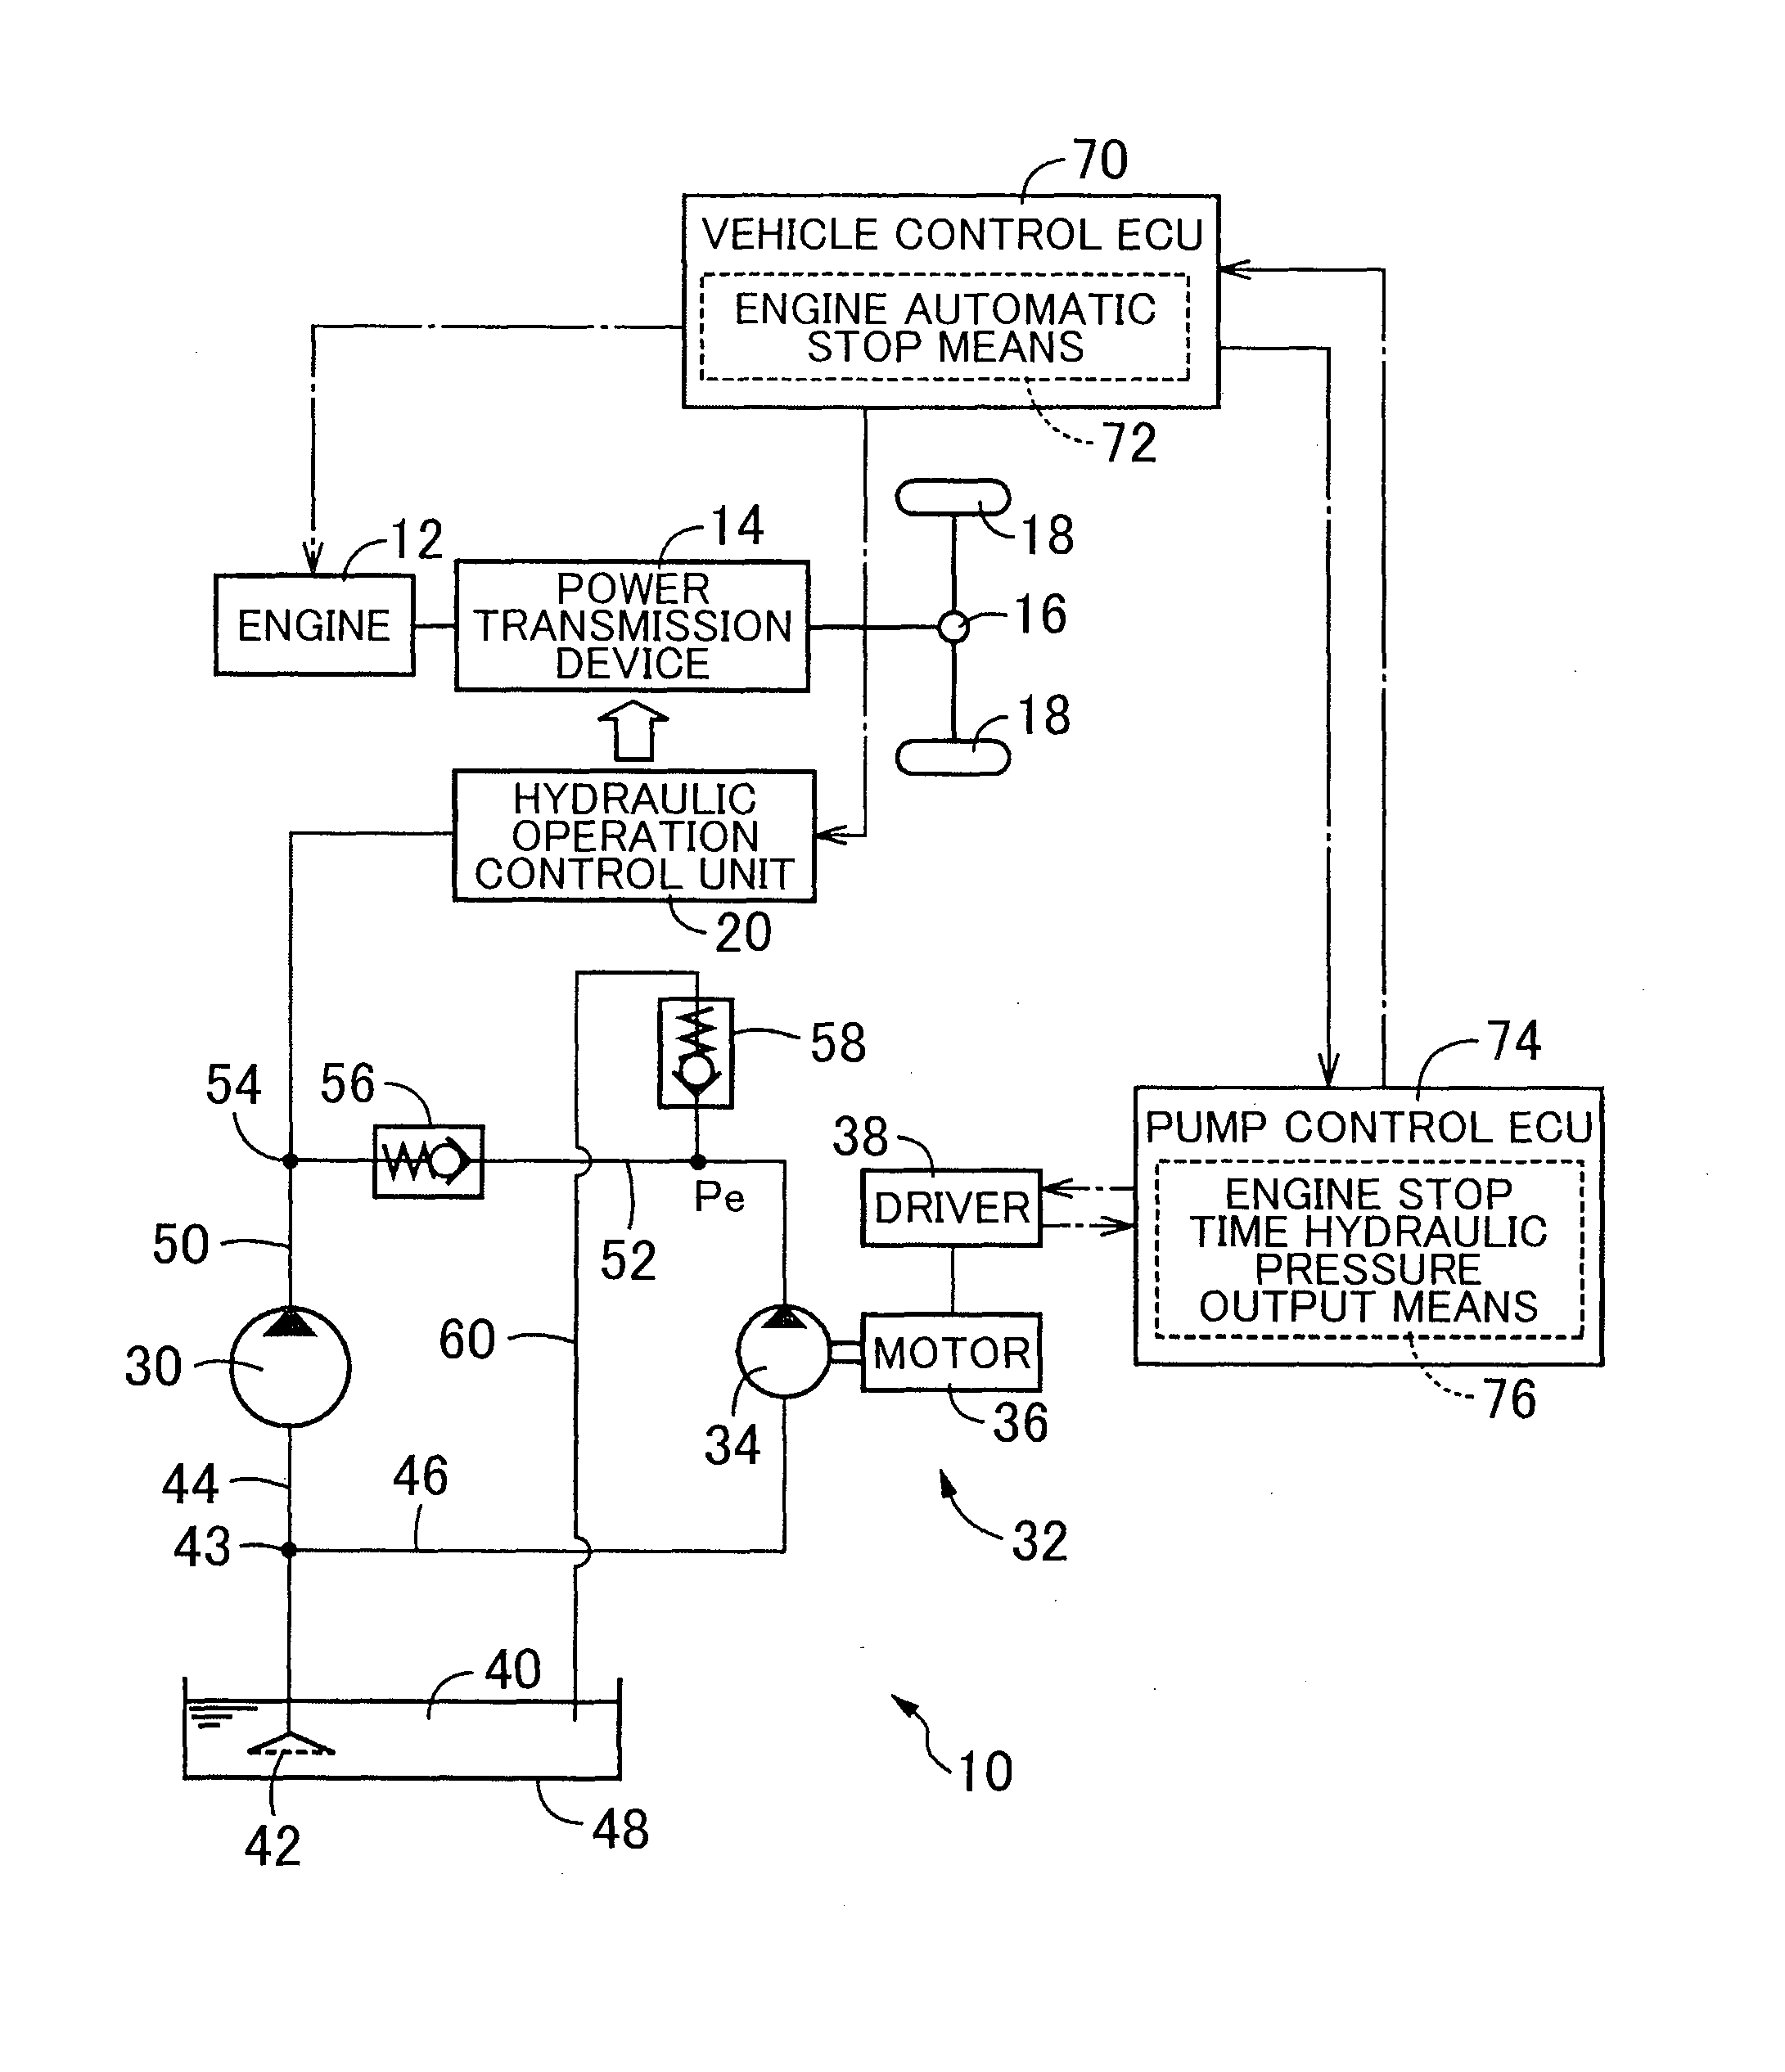 Hydraulic circuit for power transmission device of vehicle